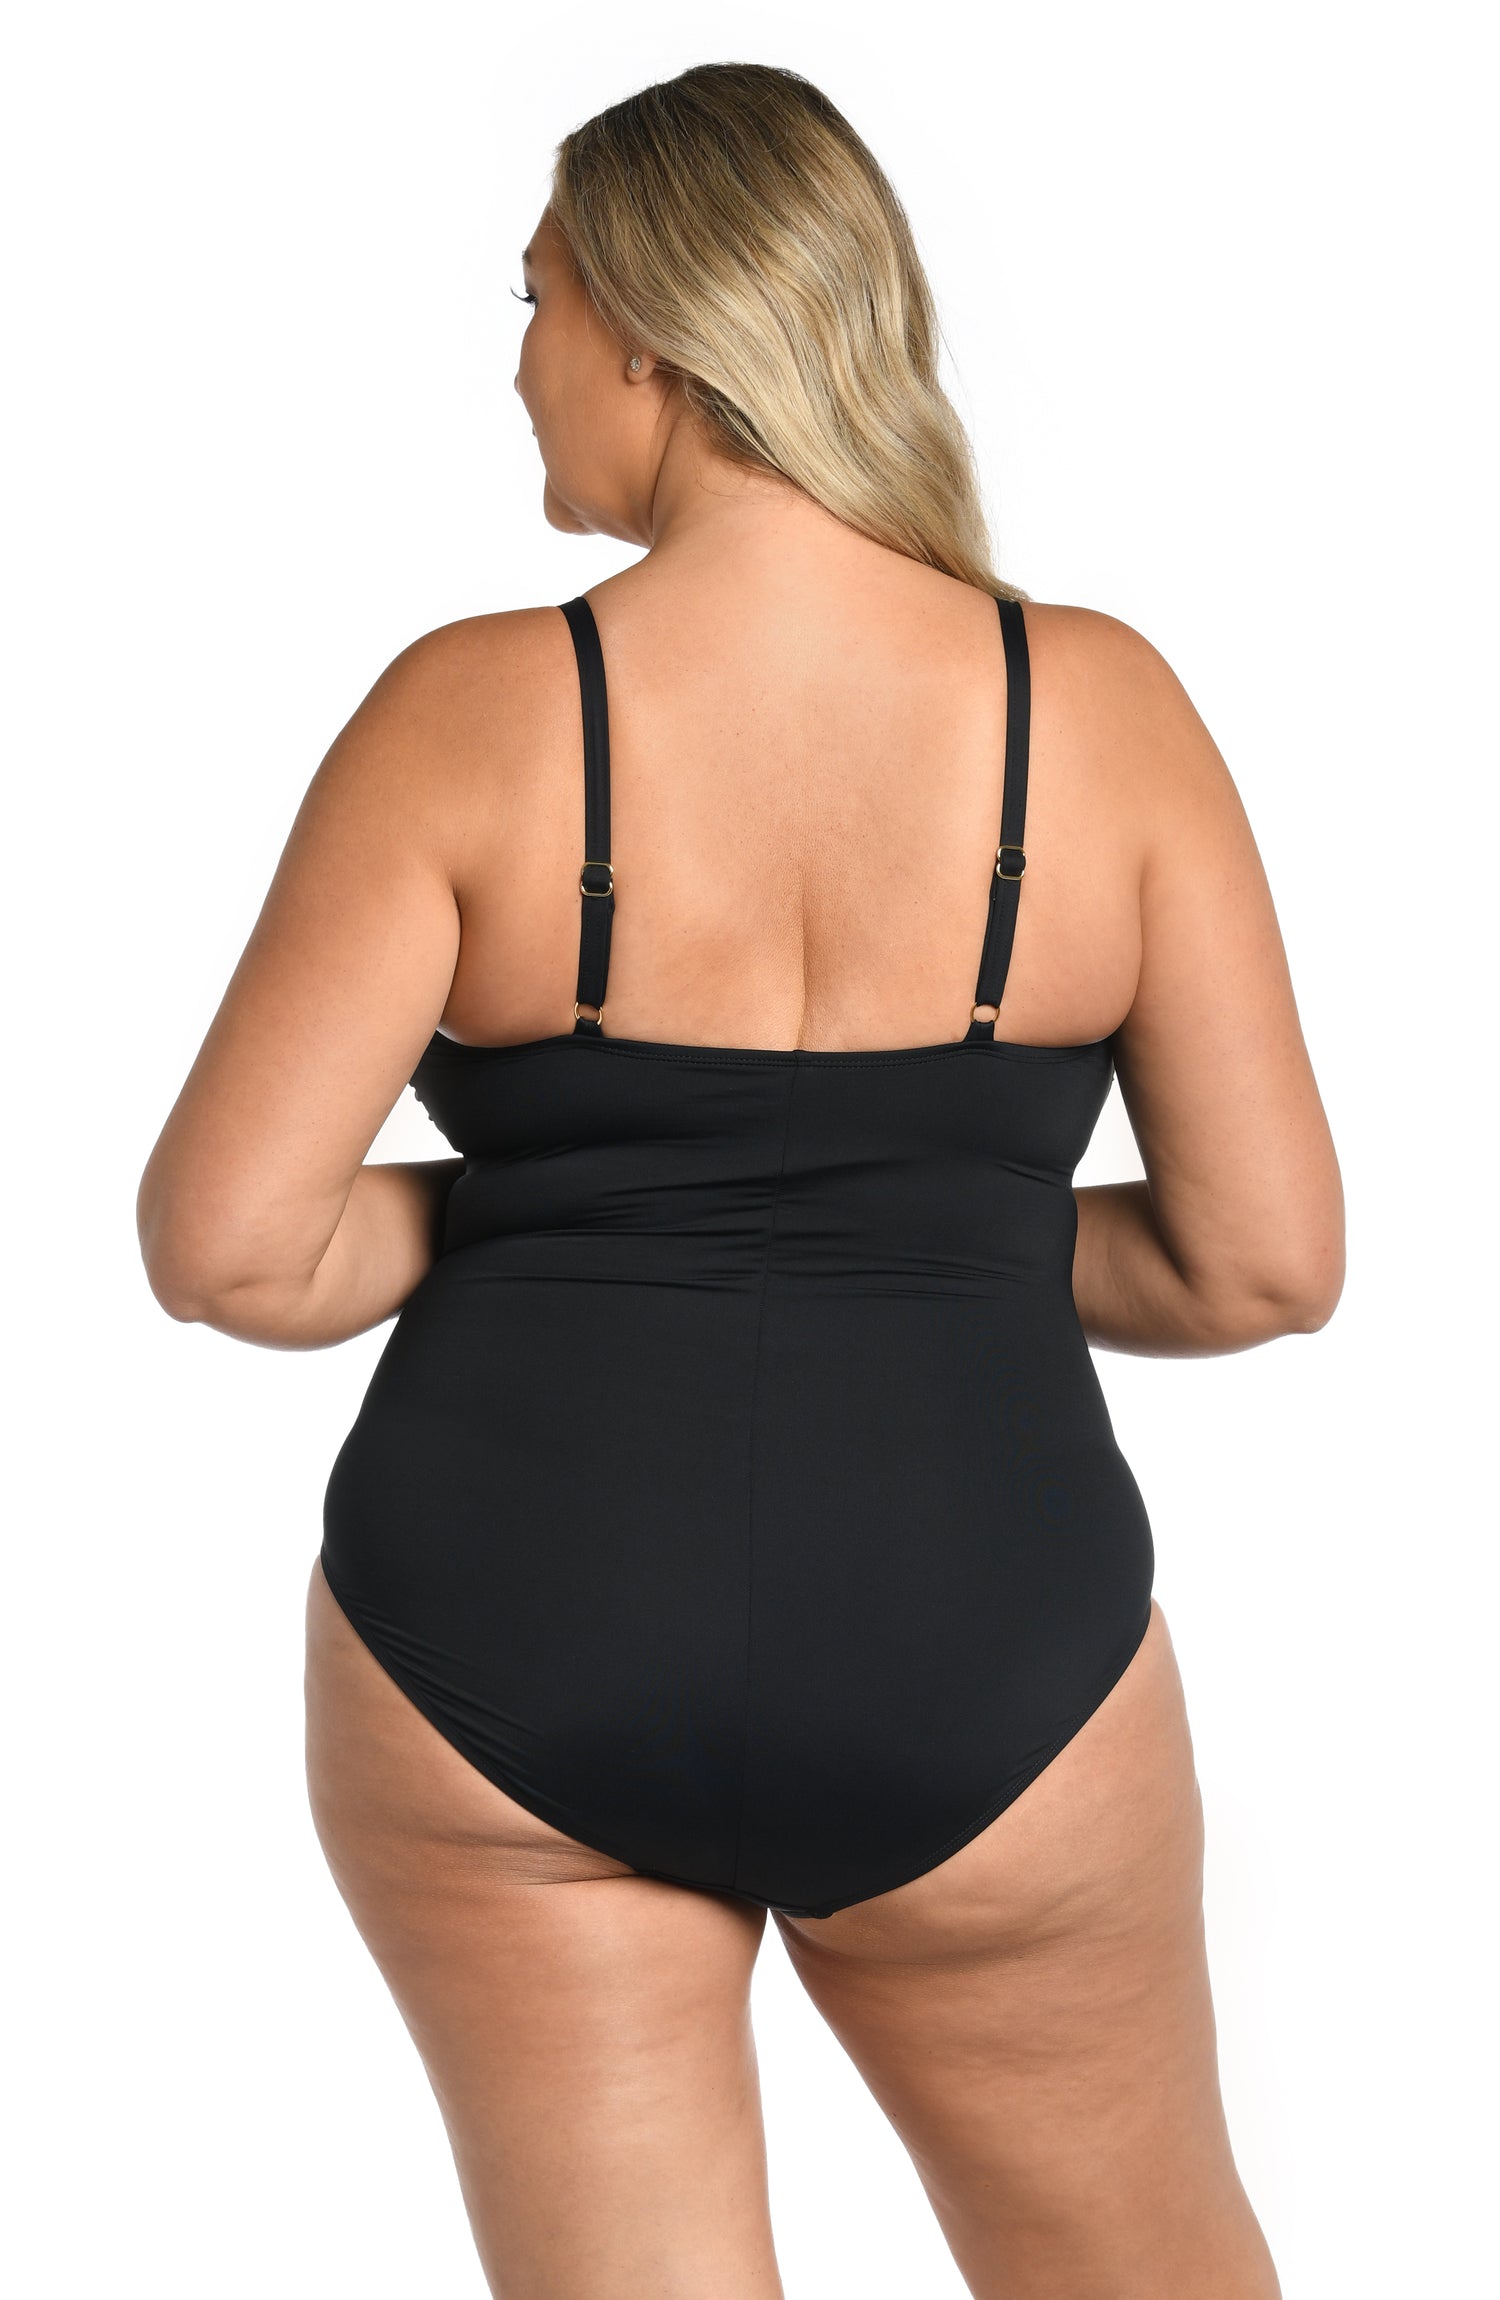 Roxanne sarong swimsuit one piece Black sizes 10 to 18 34 to 42 C